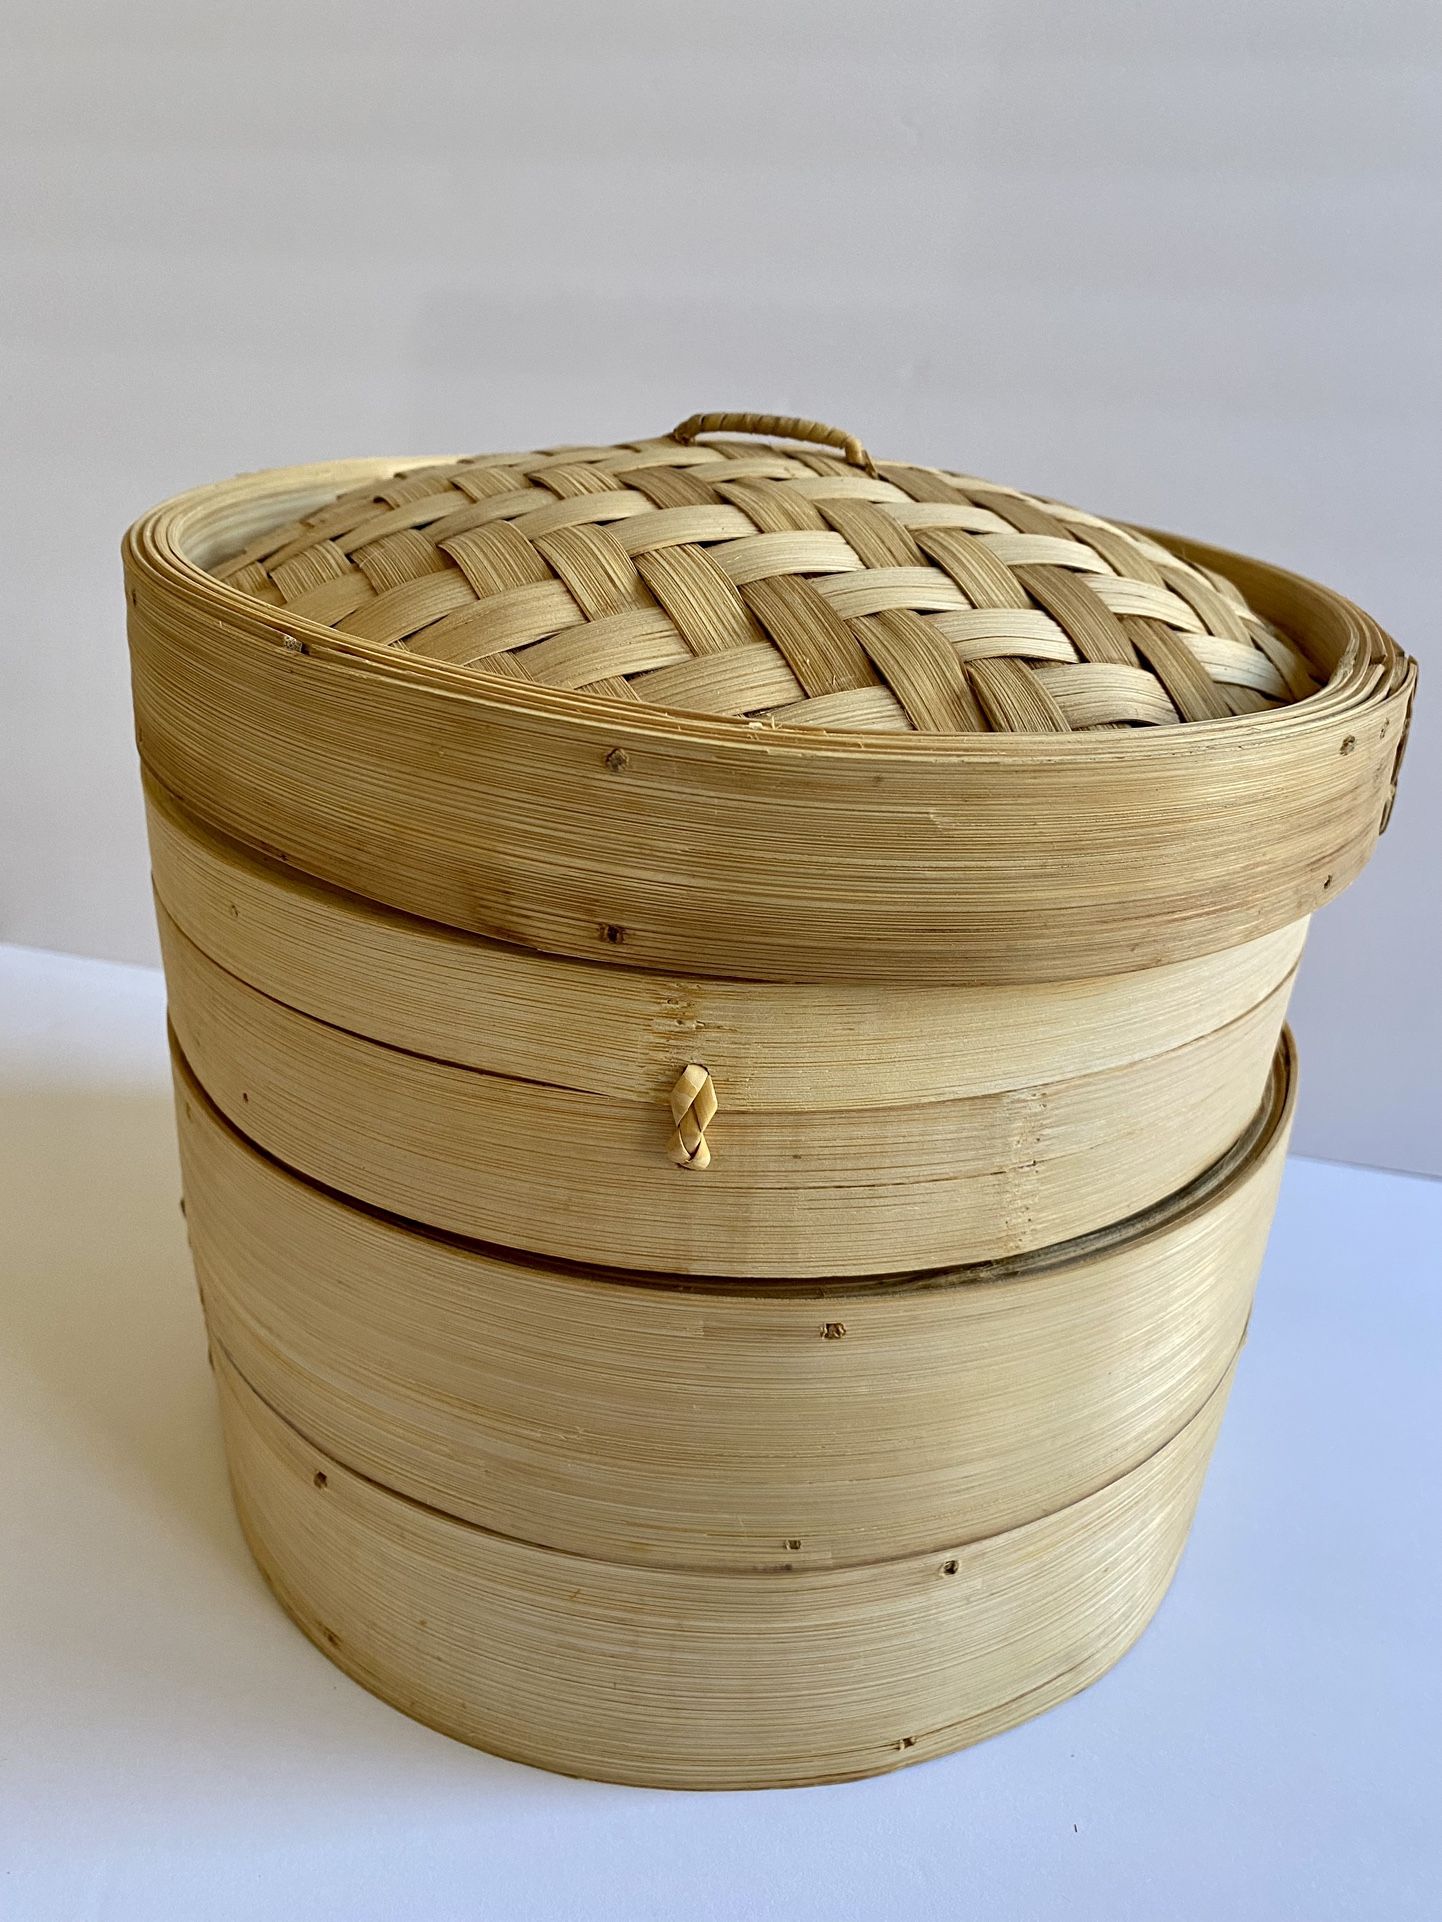 Bamboo Steamer 3 Tiered With Lid 4 Pieces Set